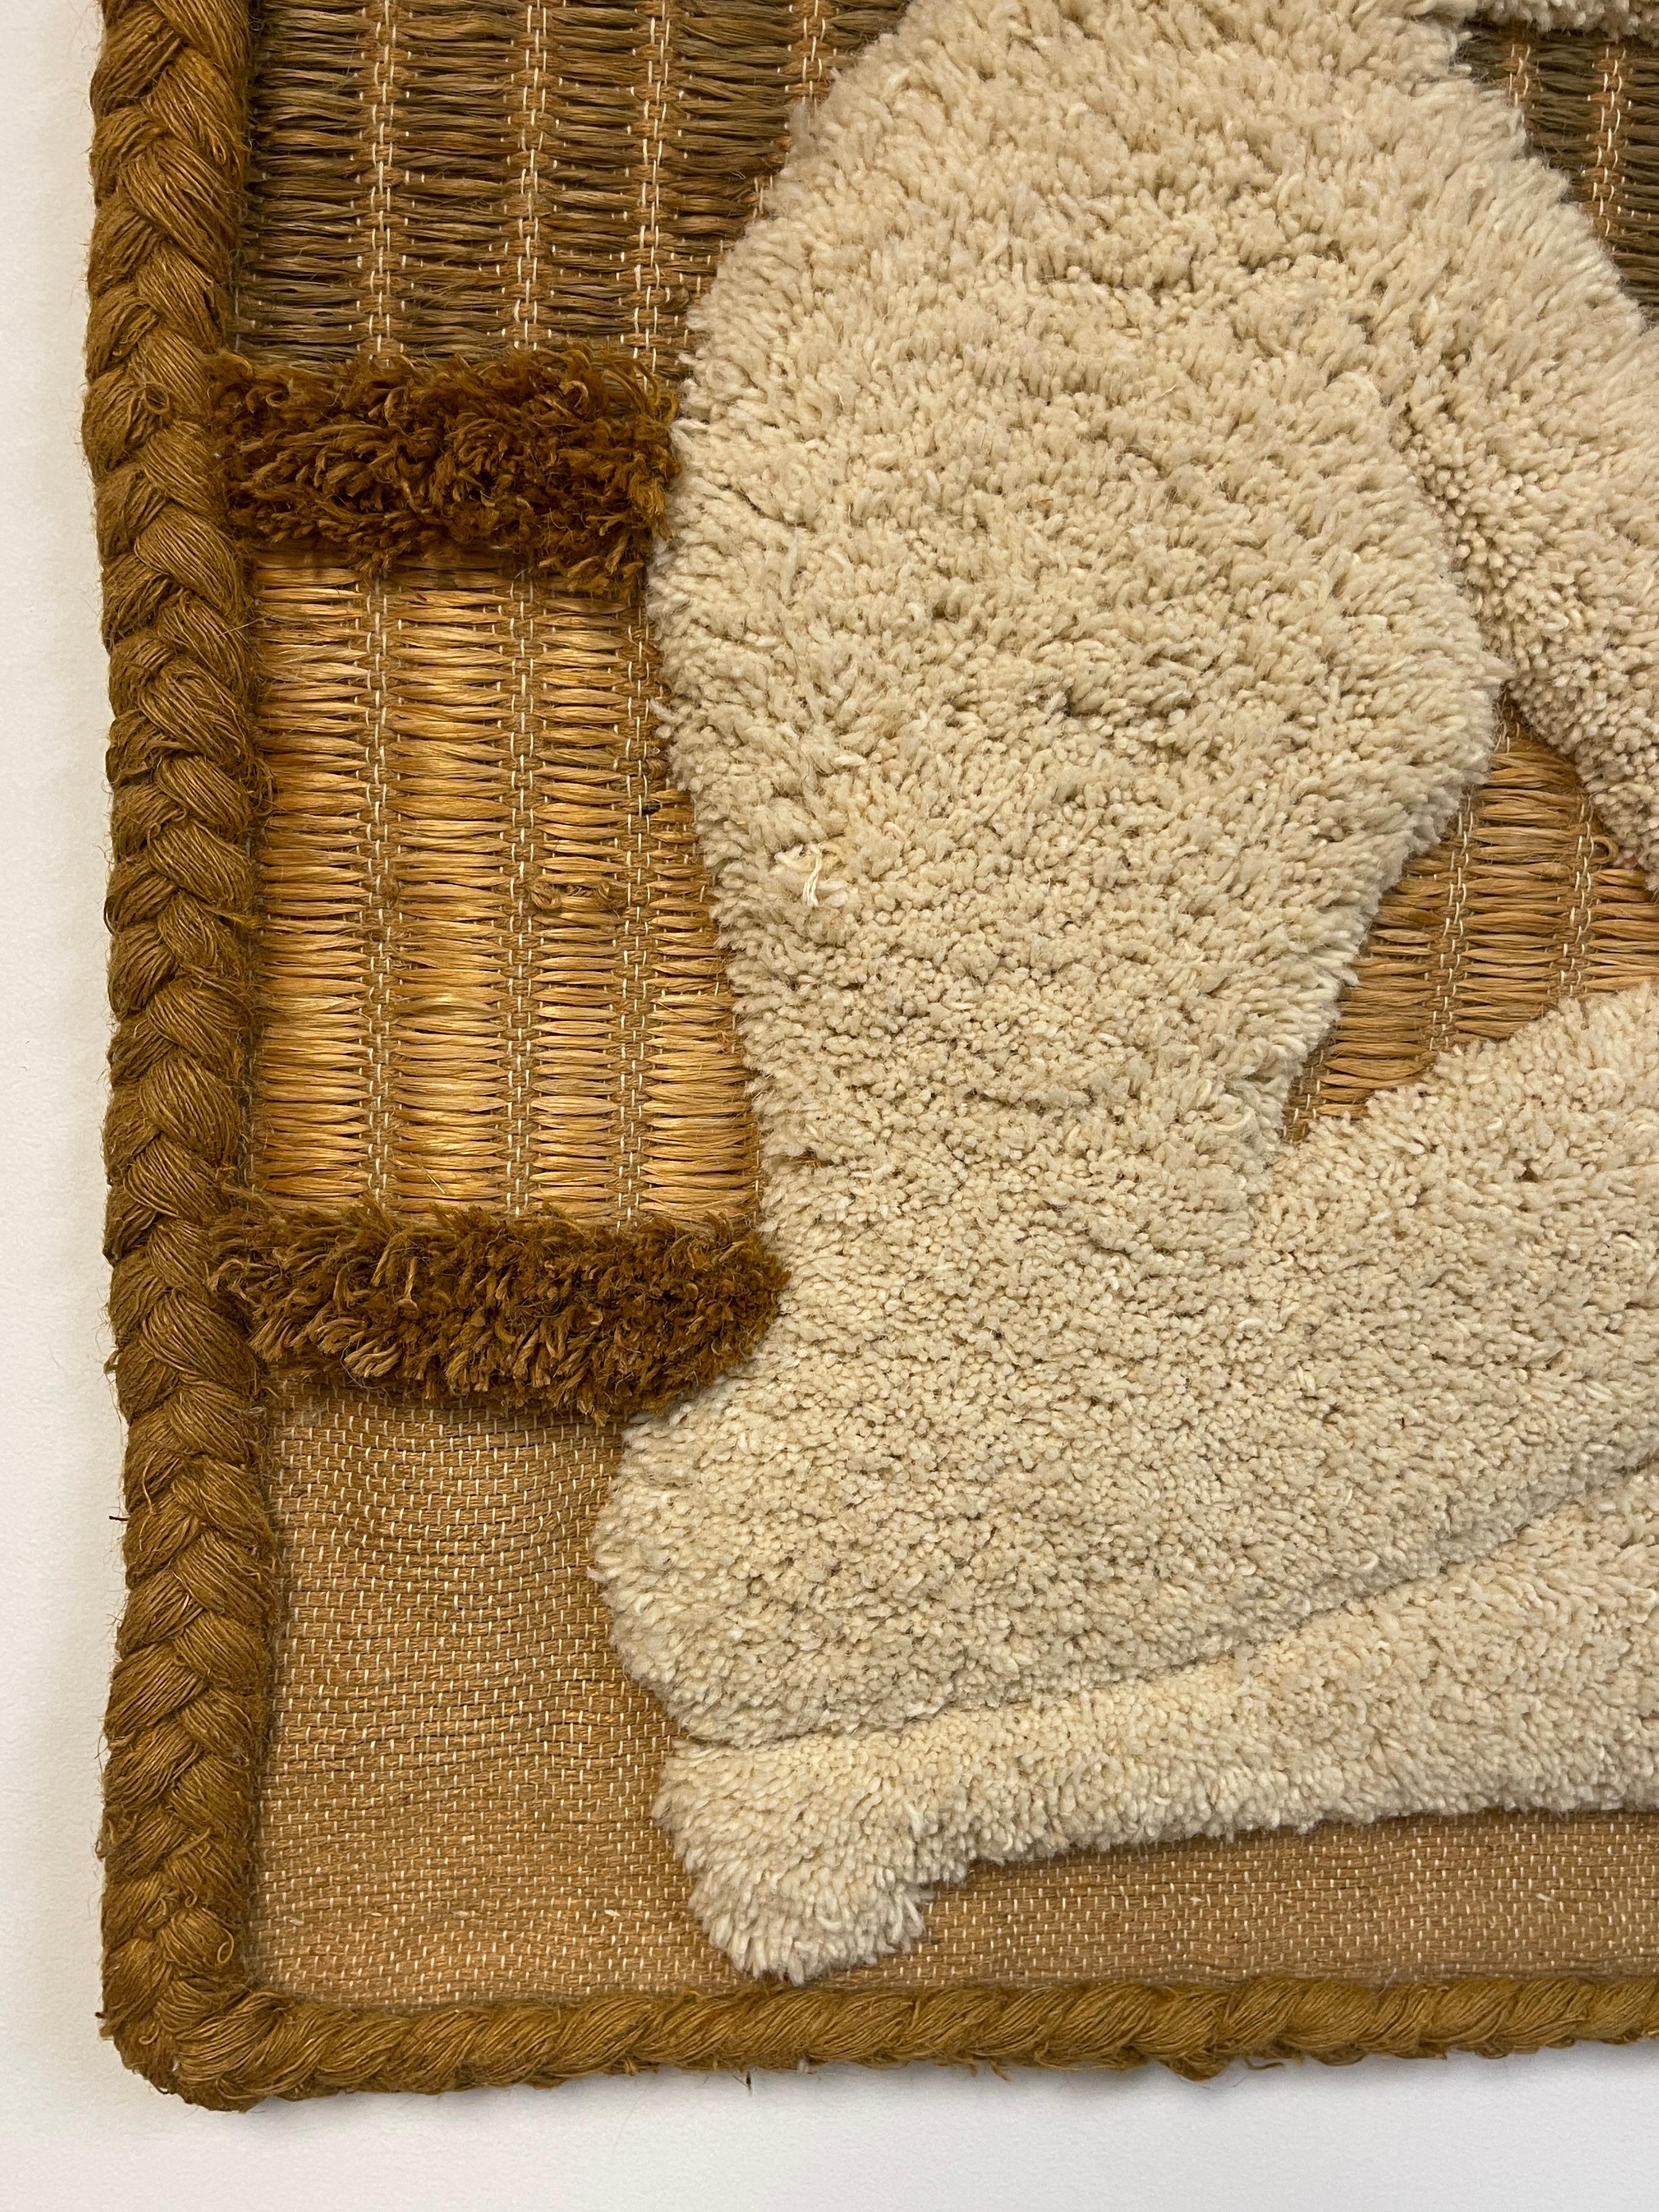 20th Century Natural Fiber Art Wall Tapestry 'Seated Nude' by Don Freedman, 1978